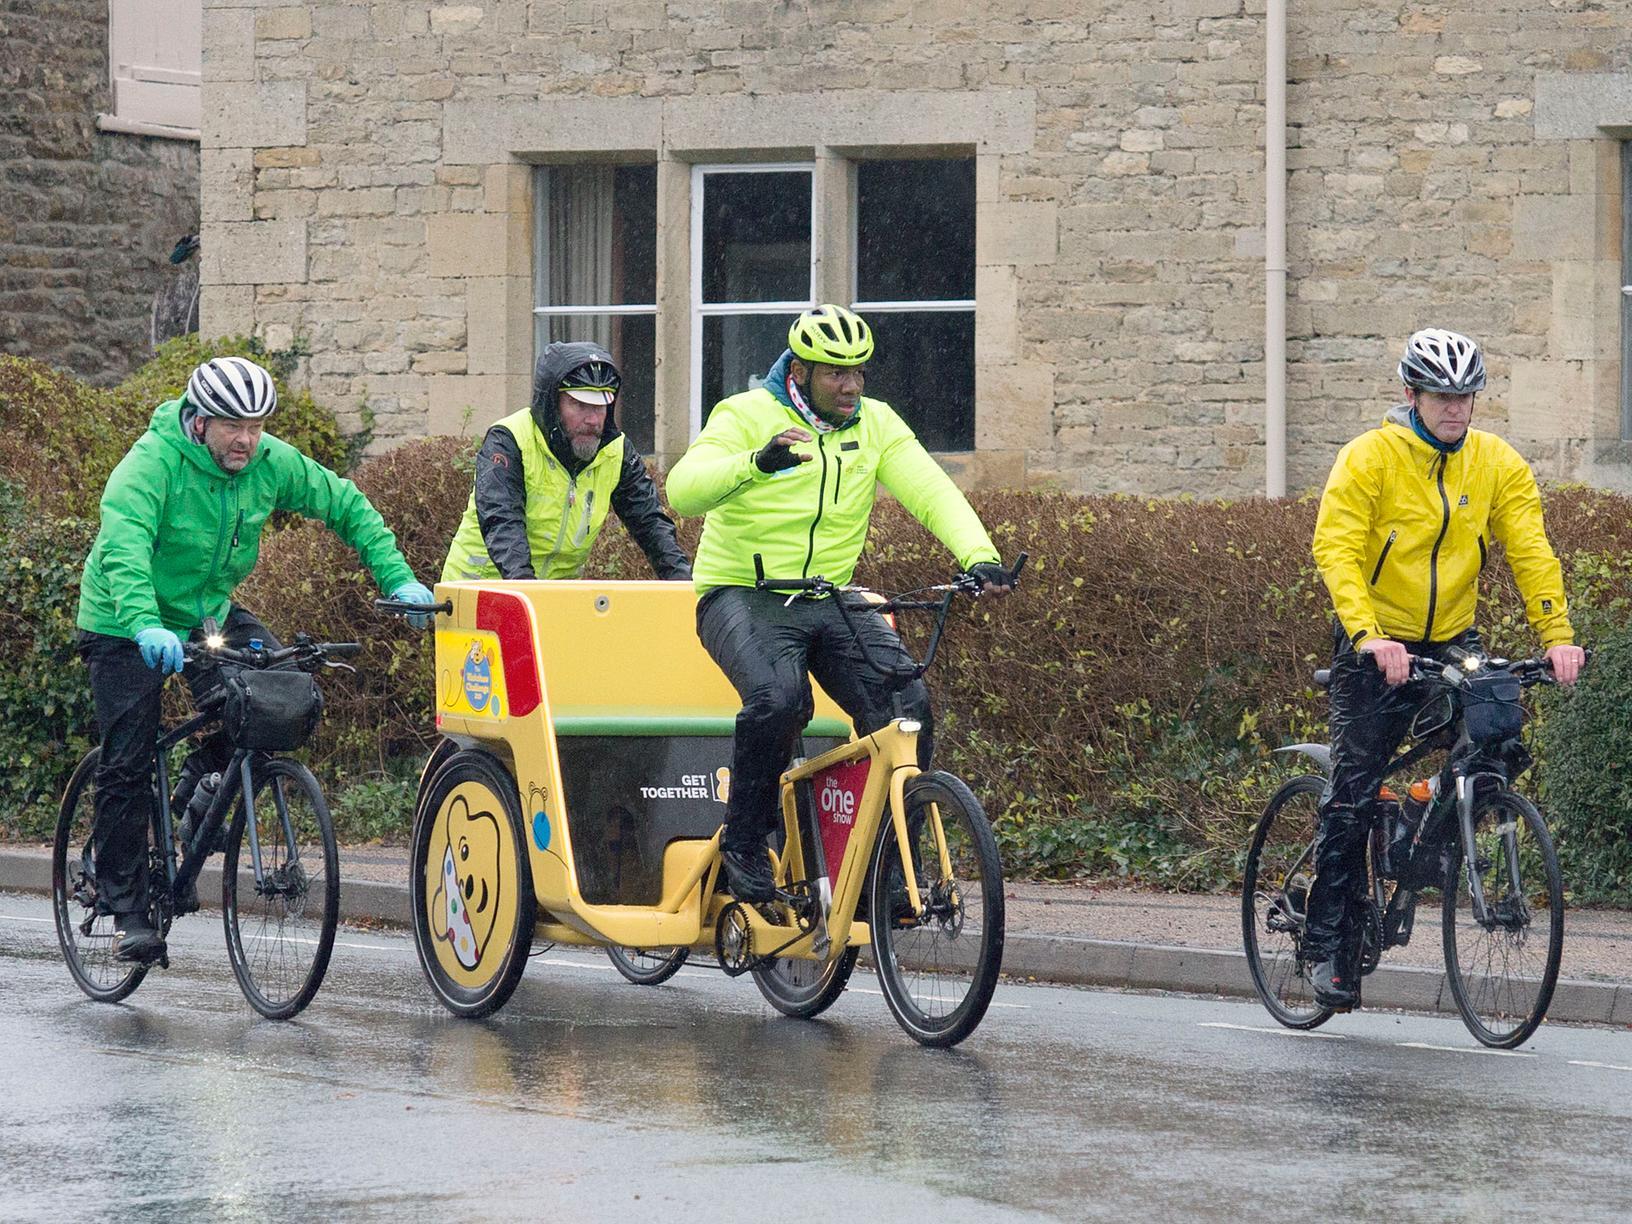 The team later made it to Weekley. The Rickshaw riders are a team of six teenagers who have all been supported by Children in Need, this rider is Uche.